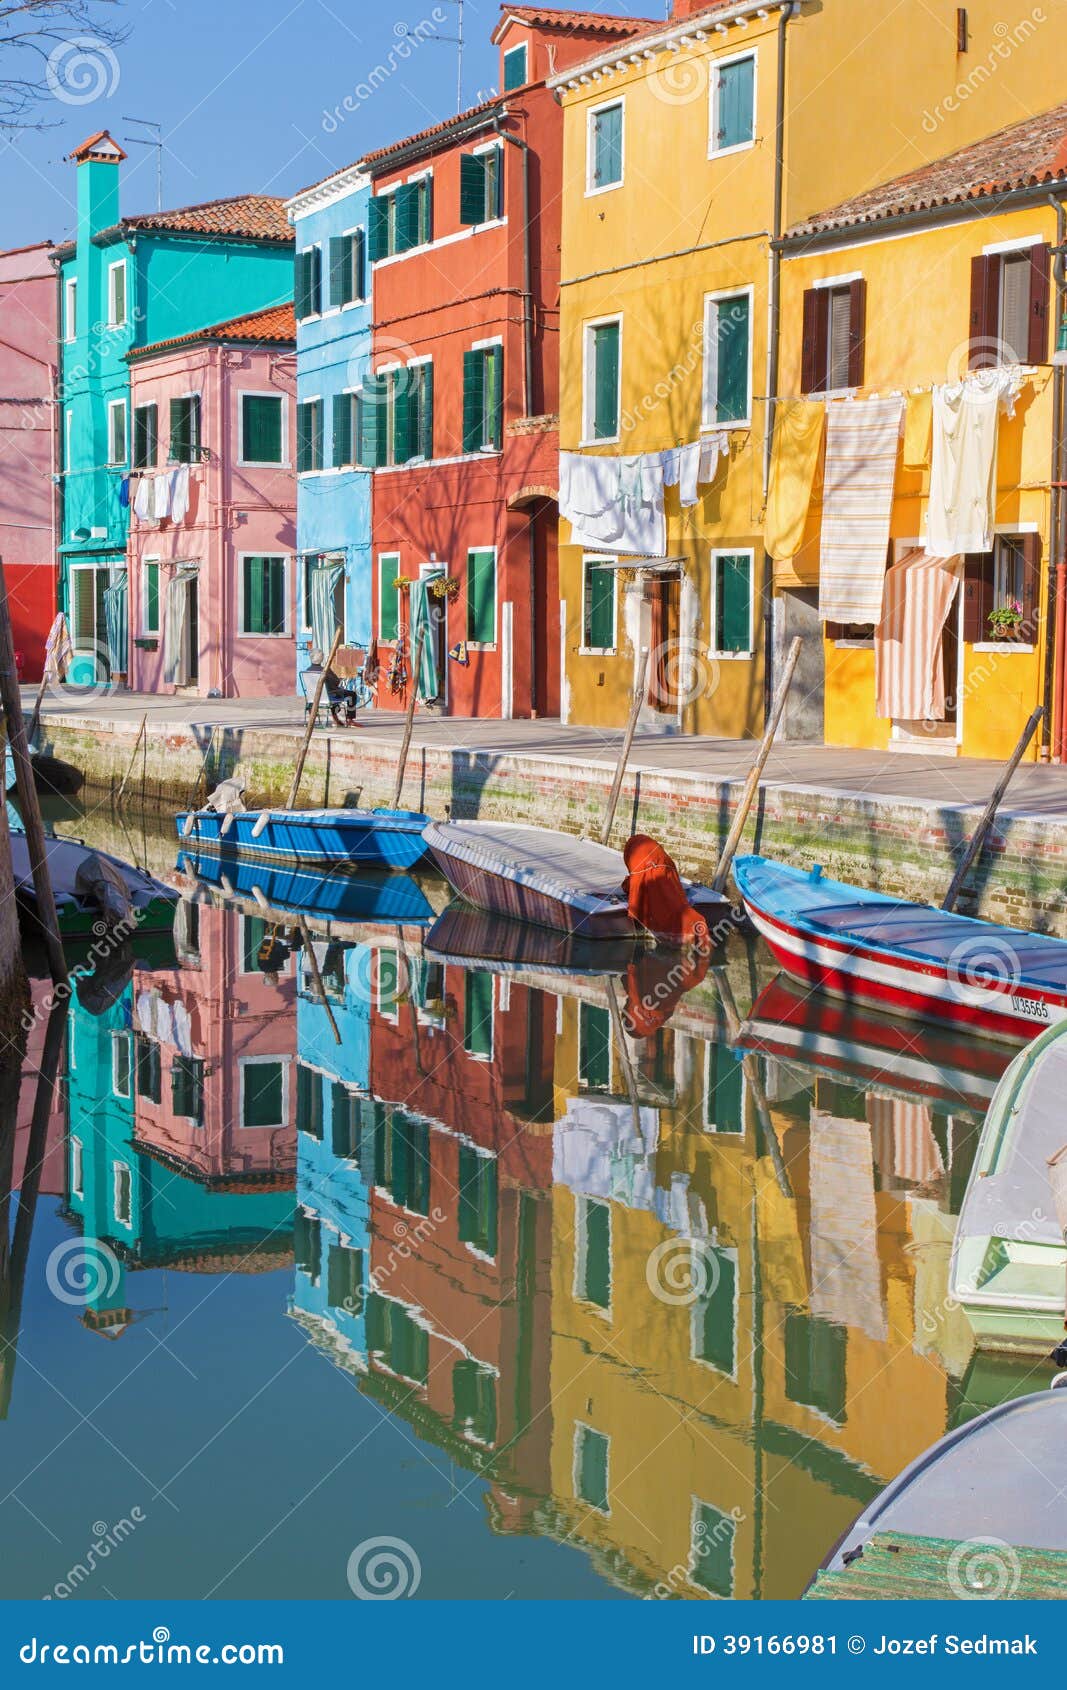 Venice - Houses Over The Canal From Burano Island Editorial Photo 